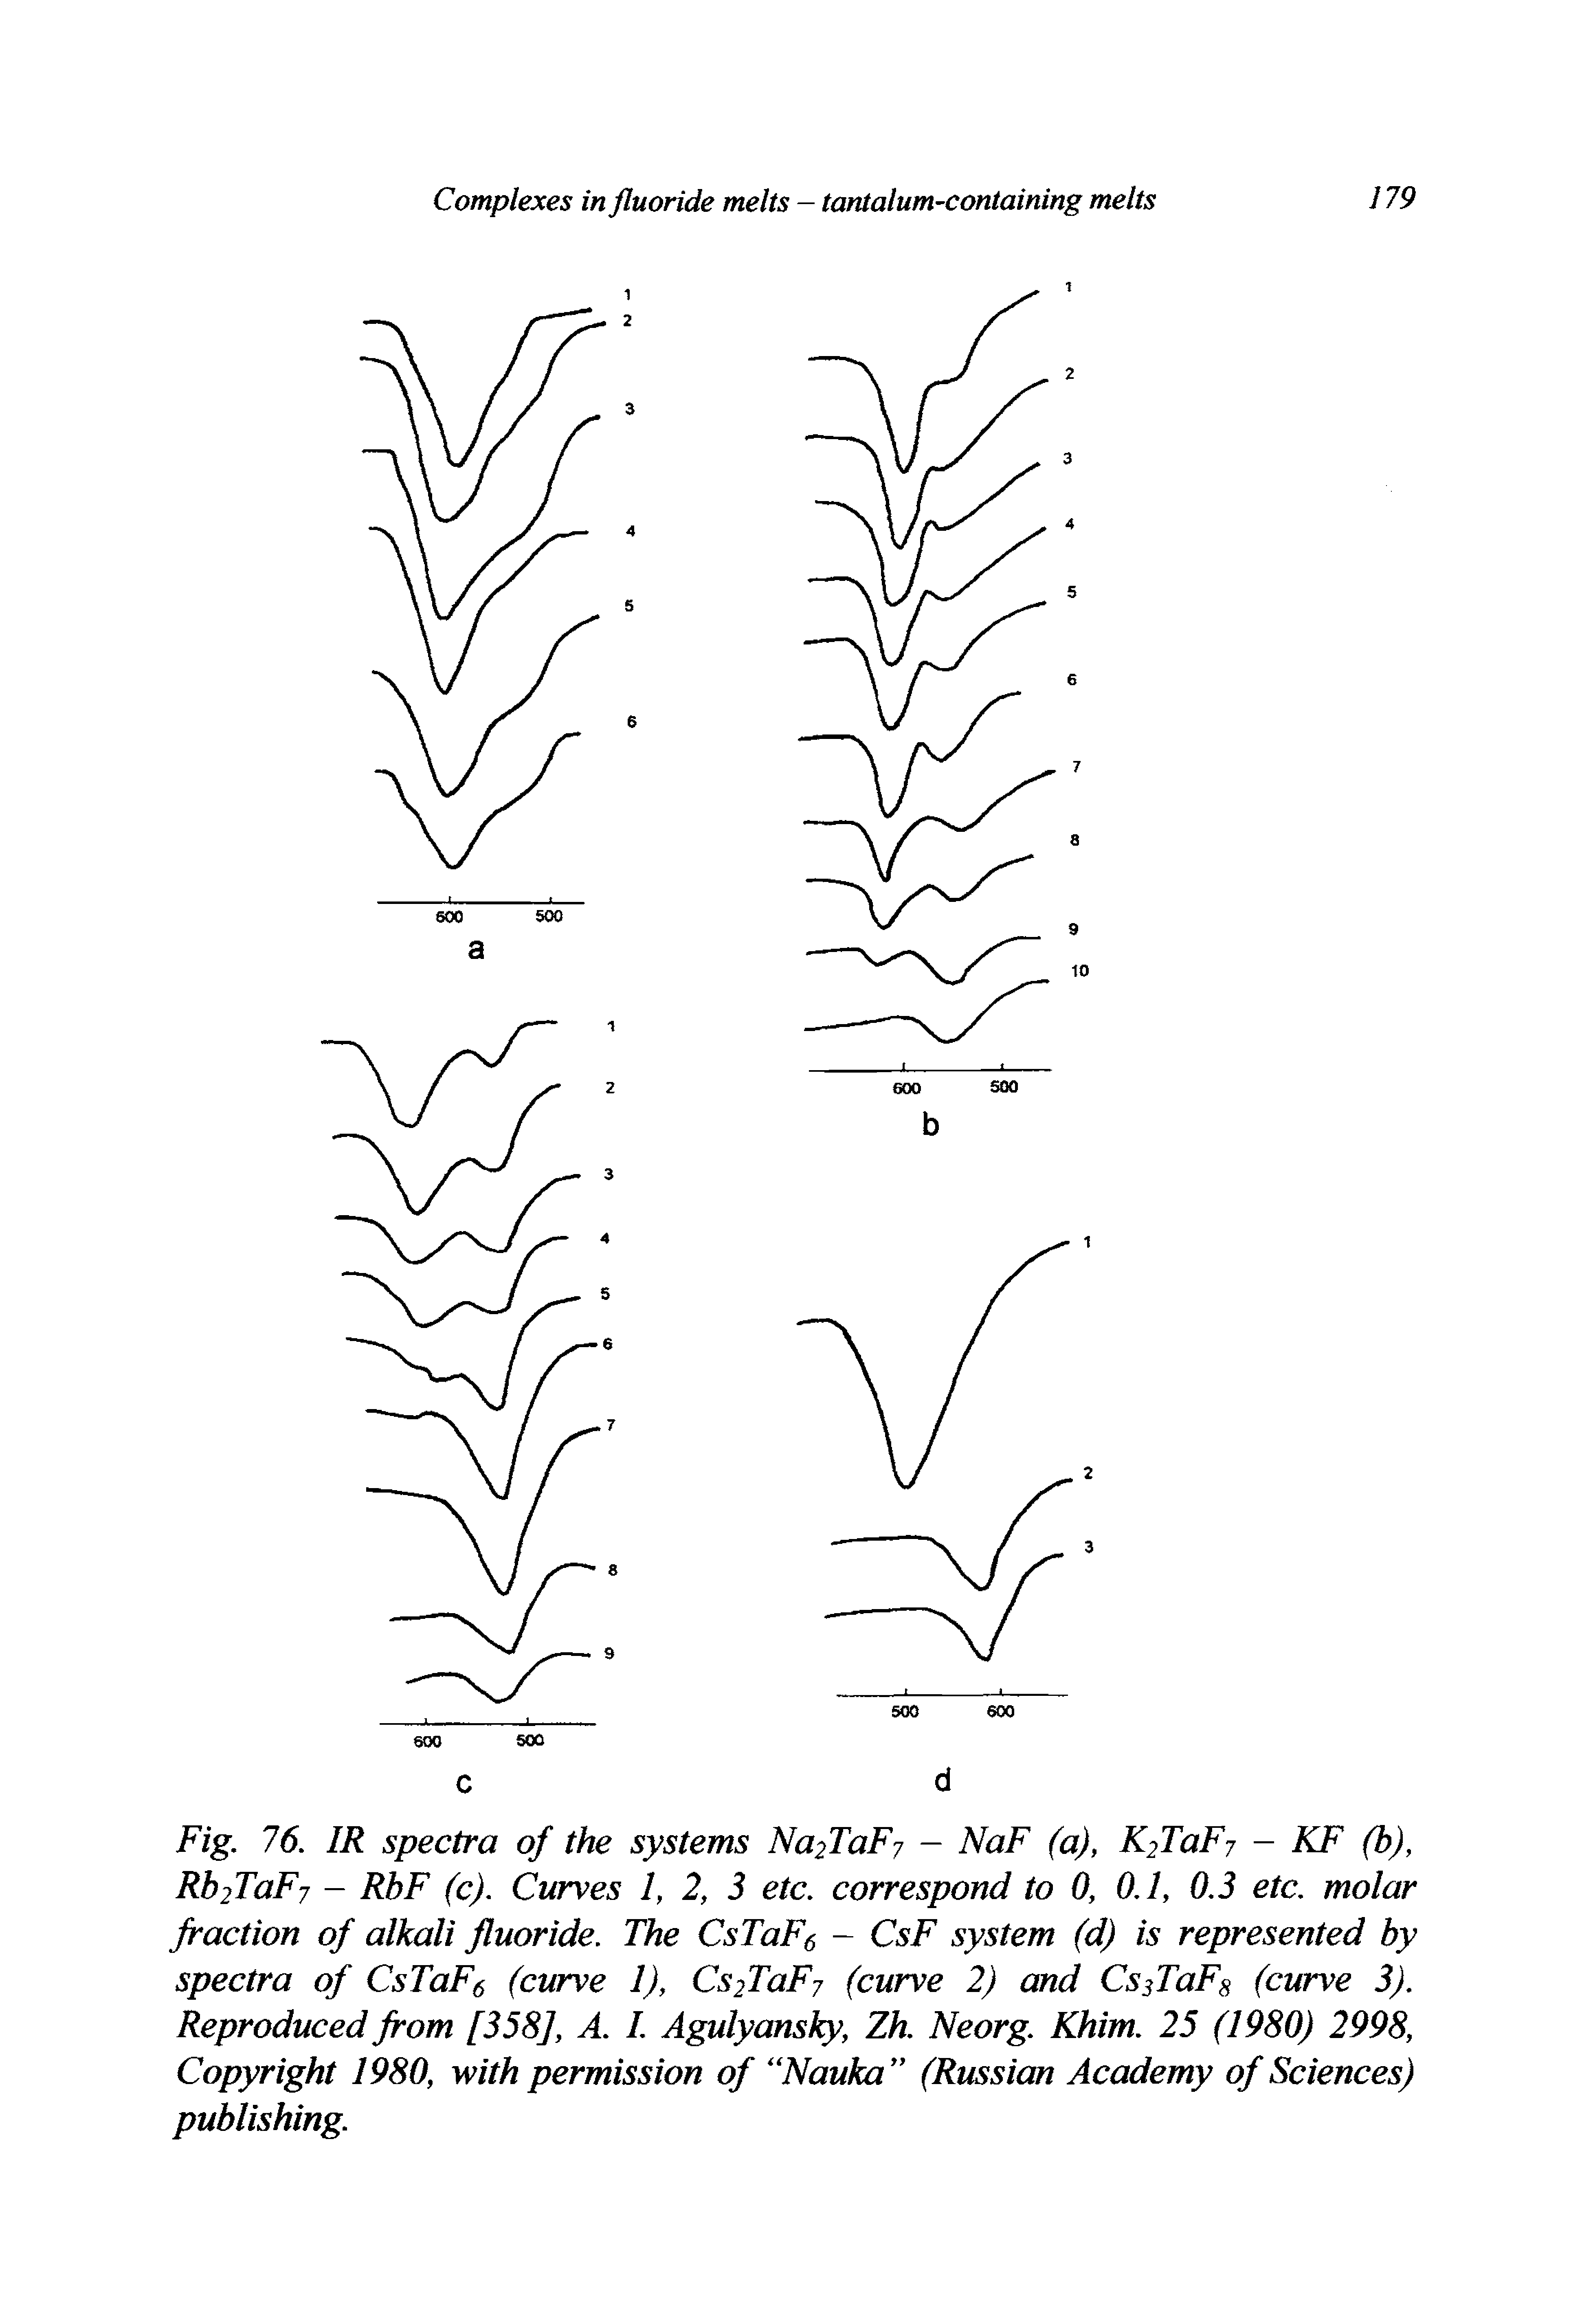 Fig. 76. IR spectra of the systems Na2TaF7 - NaF (a), K2TaF7 - KF (b), Rb2TaF7 - RbF (c). Curves 1, 2, 3 etc. correspond to 0, 0.1, 0.3 etc. molar fraction of alkali fluoride. The CsTaFf, - CsF system (d) is represented by spectra of CsTaF6 (curve 1), Cs2TaF7 (curve 2) and Cs2TaF8 (curve 3). Reproduced from [358], A. I. Agulyansky, Zh. Neorg. Khim. 25 (1980) 2998, Copyright 1980, with permission of Nauka (Russian Academy of Sciences) publishing.